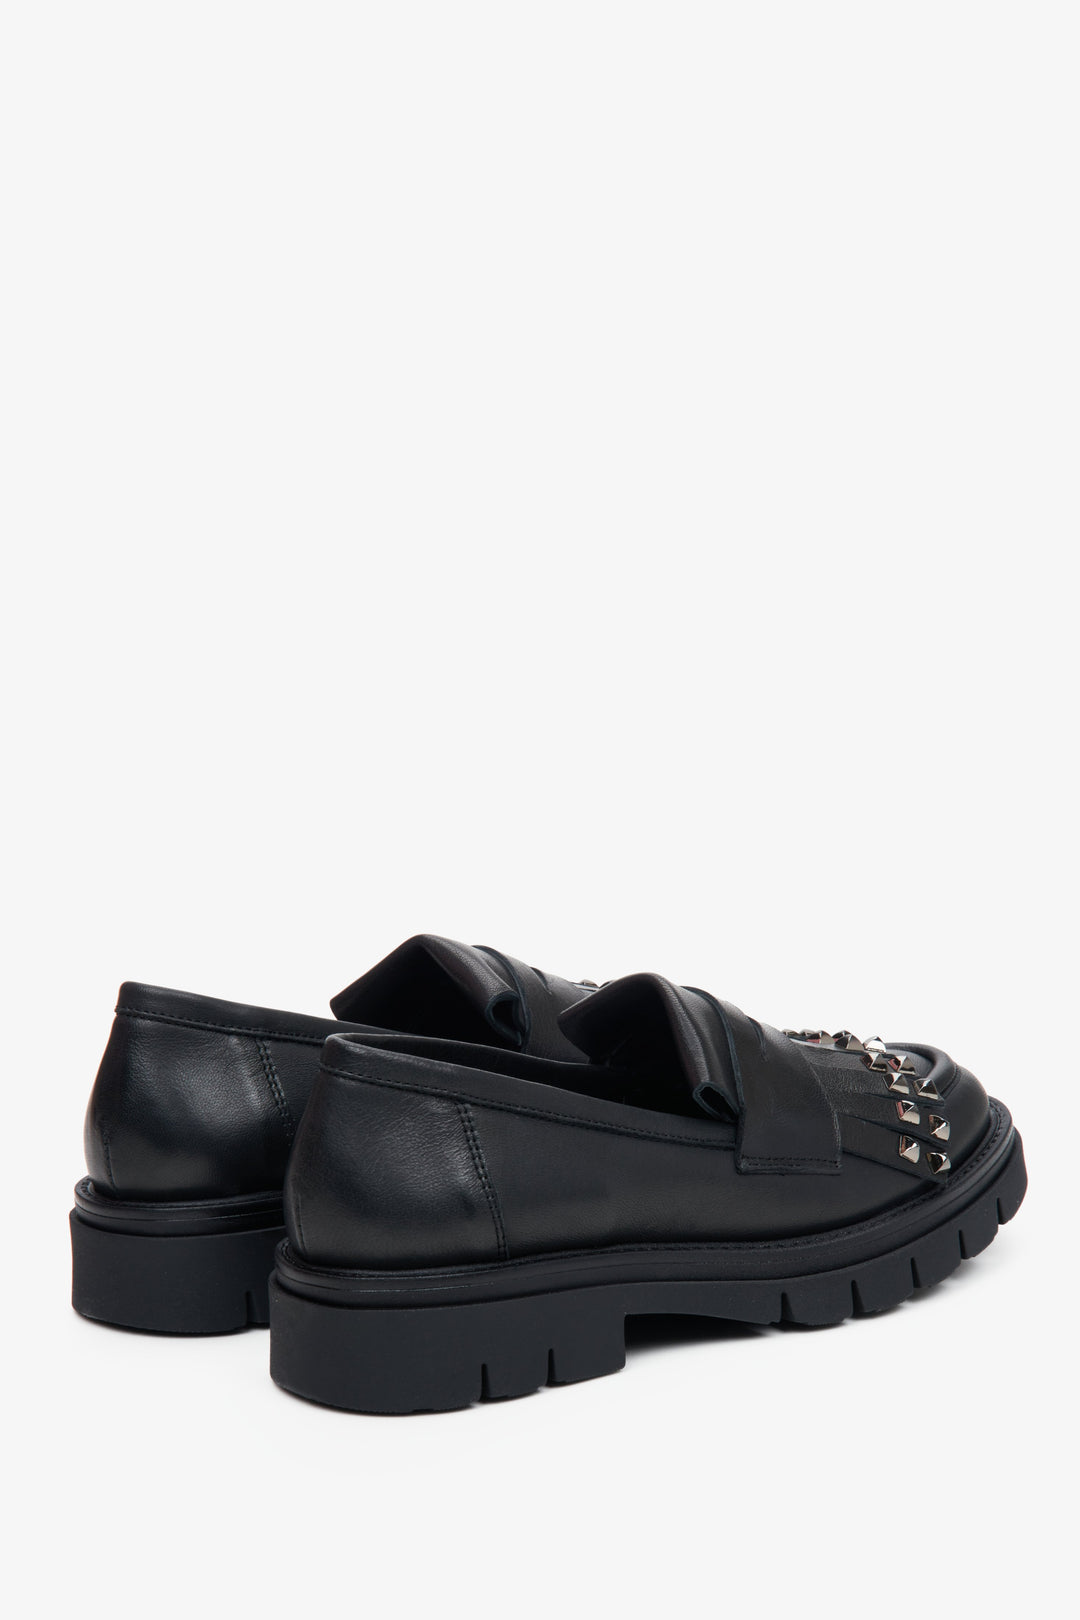 Women's black Estro moccasins - close-up on the heel and side line of the shoe.